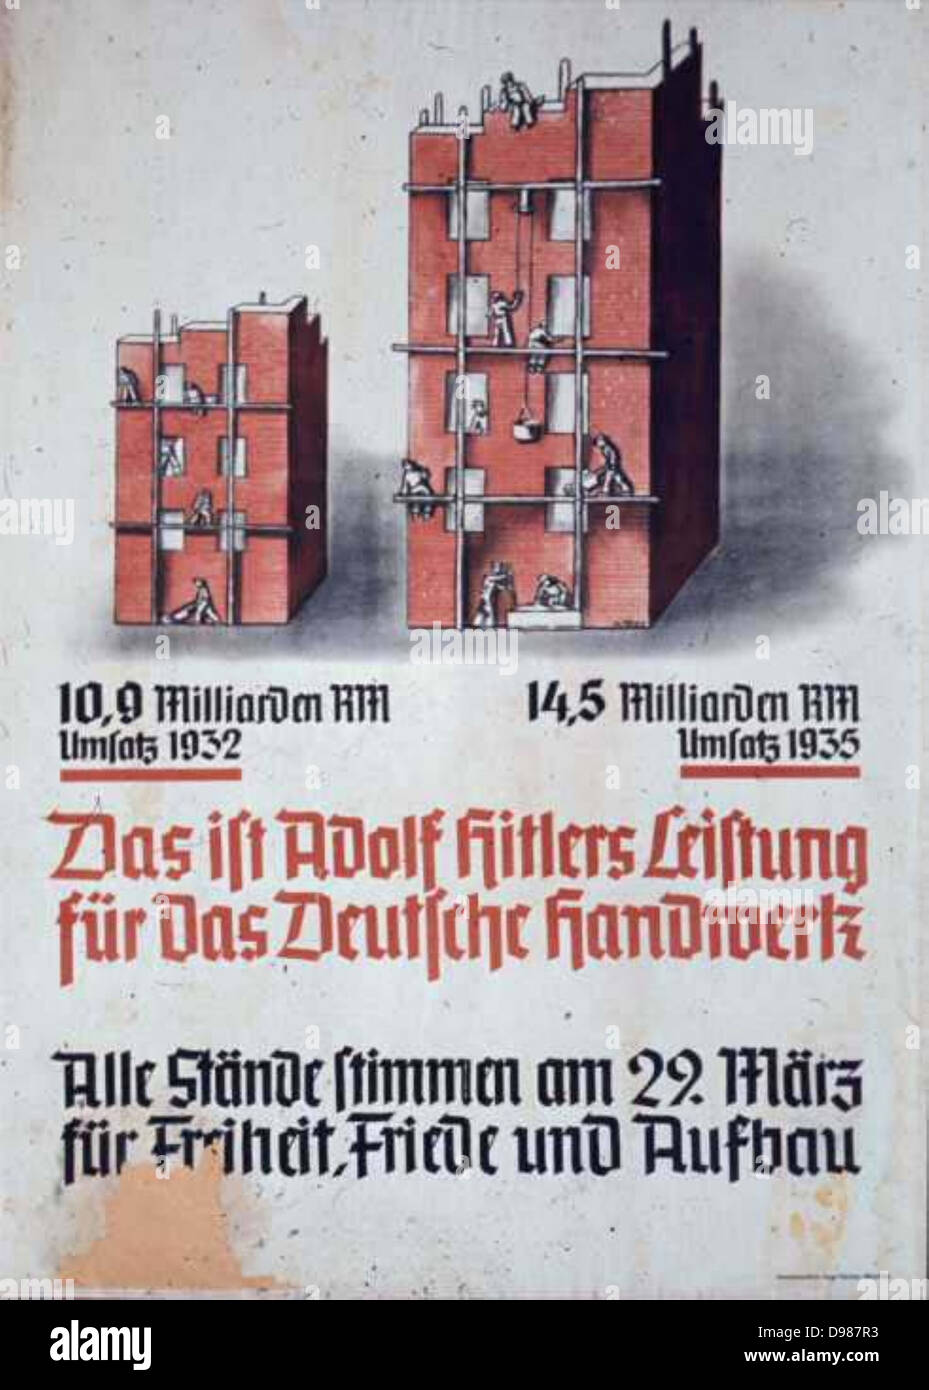 Poster showing improved output of construction in Germany under Hitler's government, c1936. Stock Photo